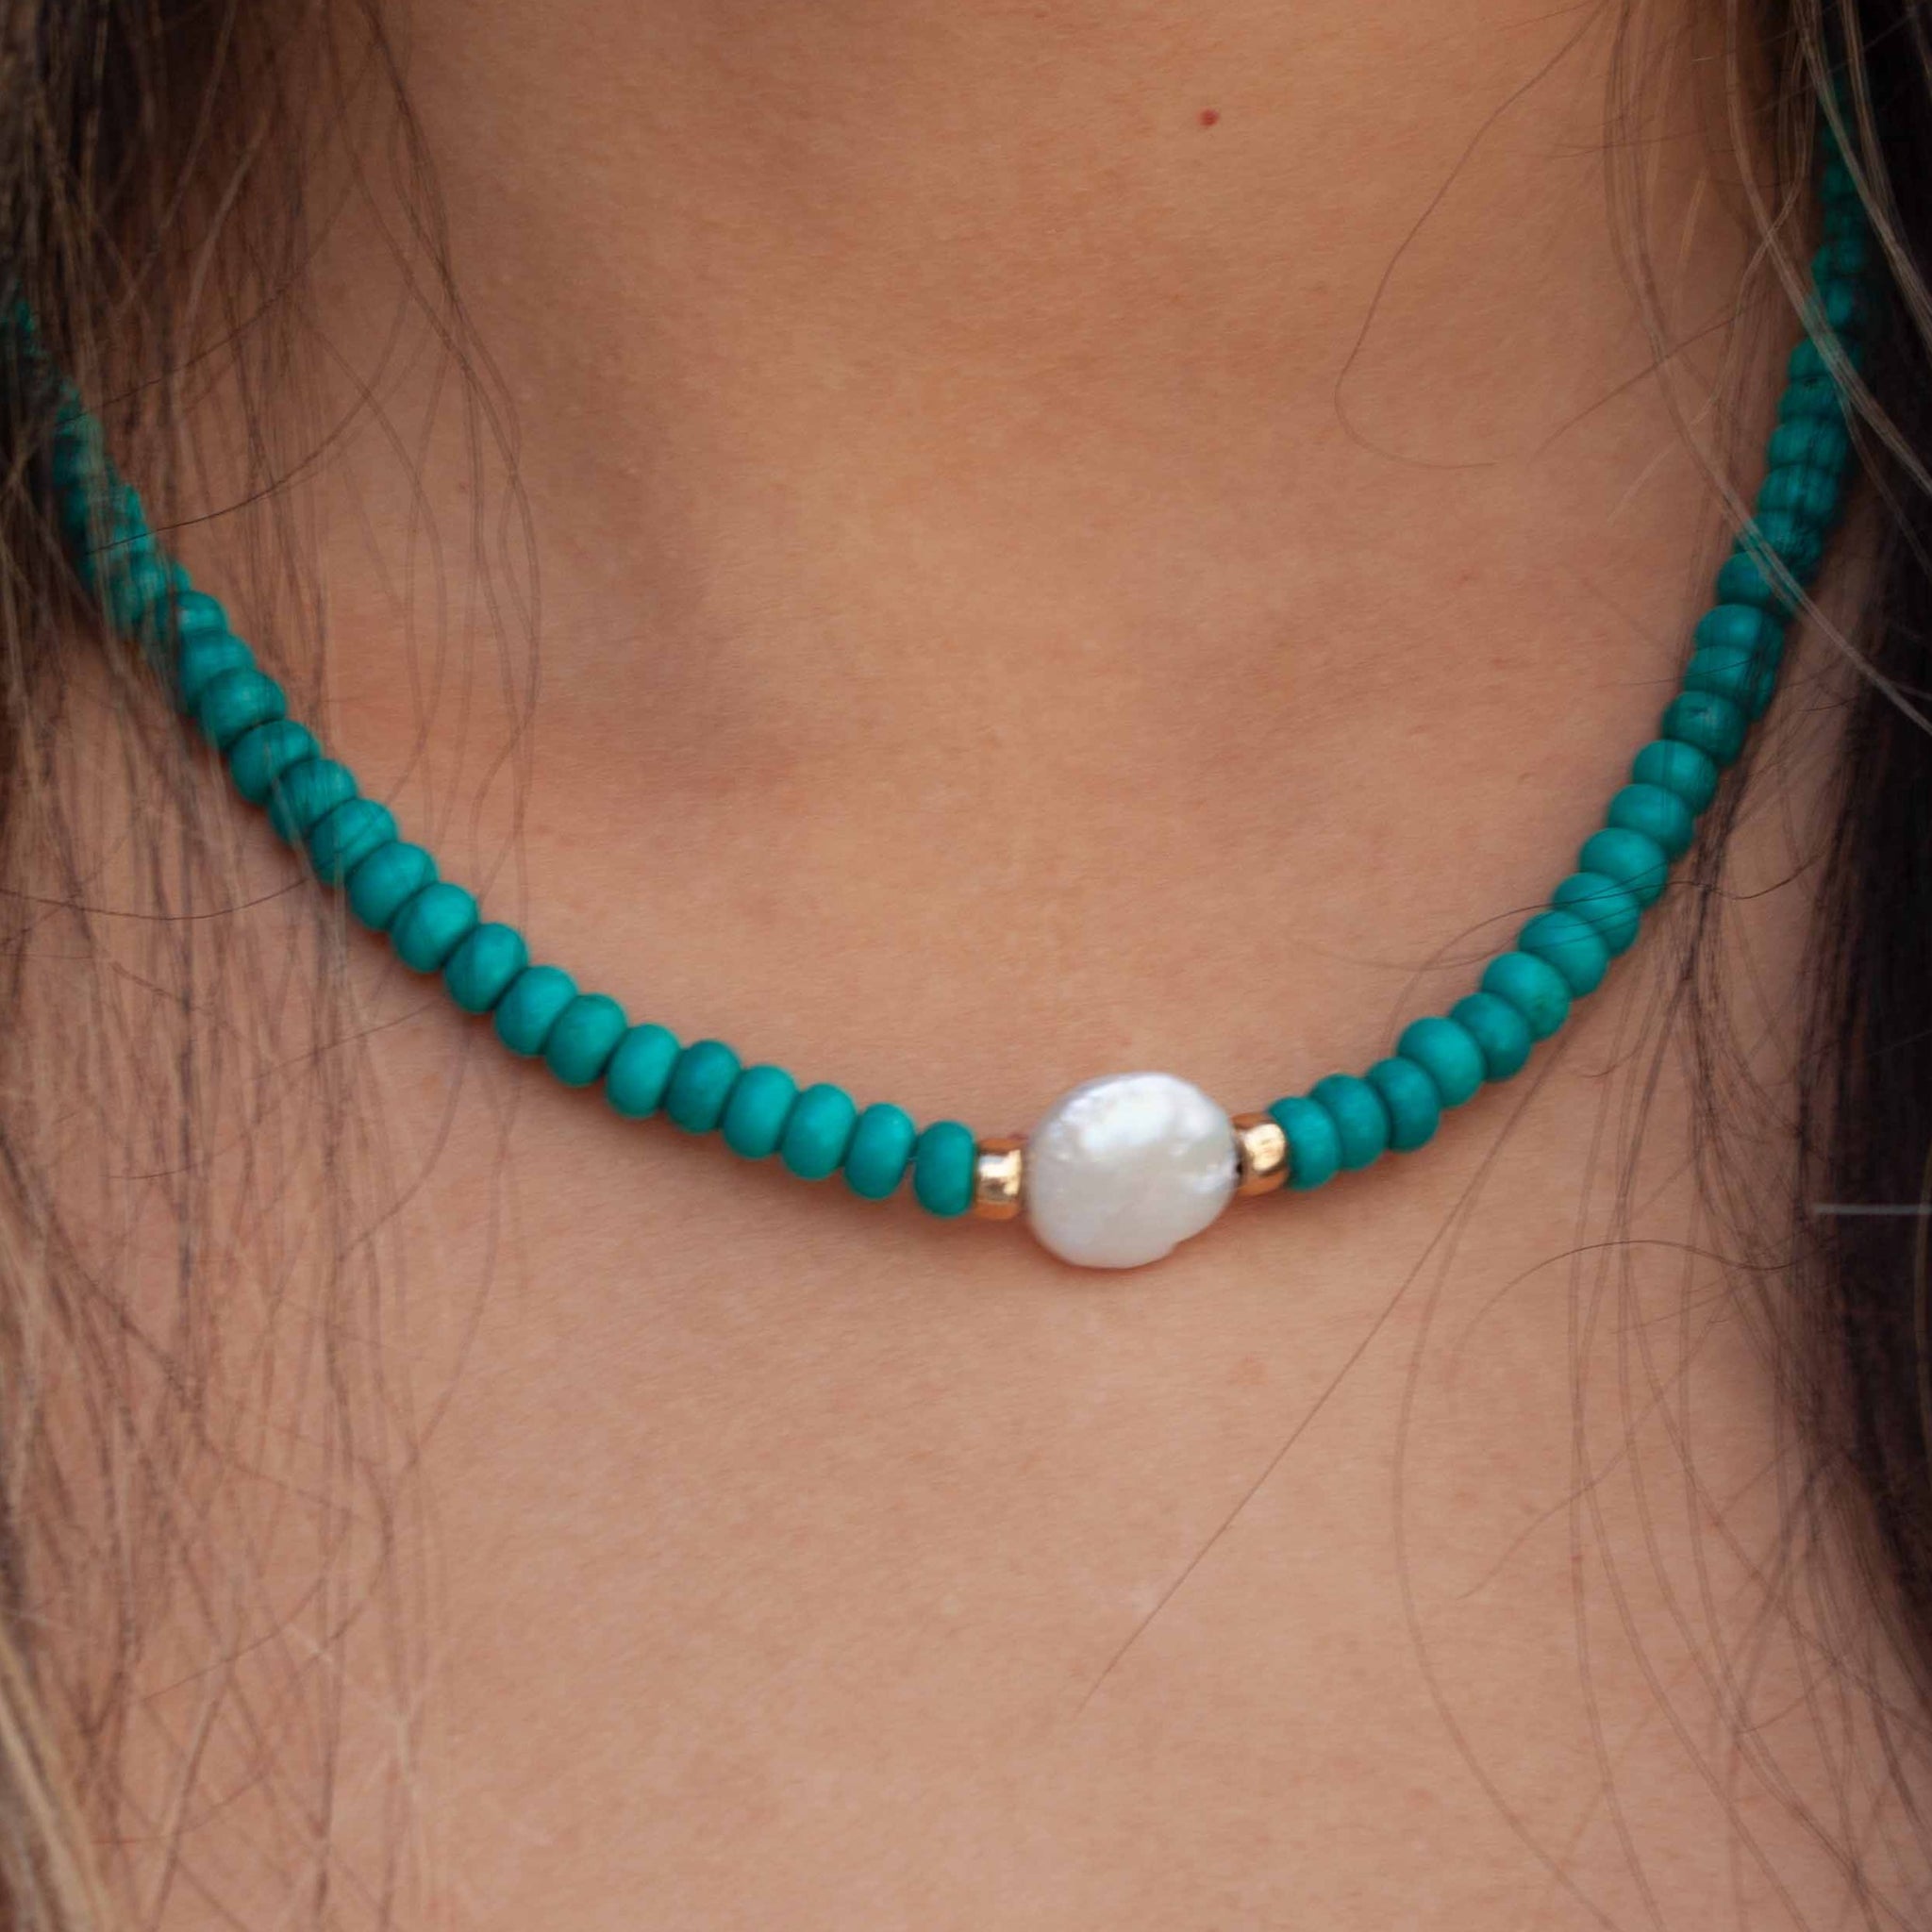 A sweet turquoise necklace with a freshwater pearl focal point to add some pop to your summer whites! 16 inch (adjustable to 18 inch) synthetic* turquoise with gold beads and freshwater pearl. Handmade in Toronto by kp jewelry co. *synthetic turquoise is a cost-efficient and sustainable alternative to the real thing.